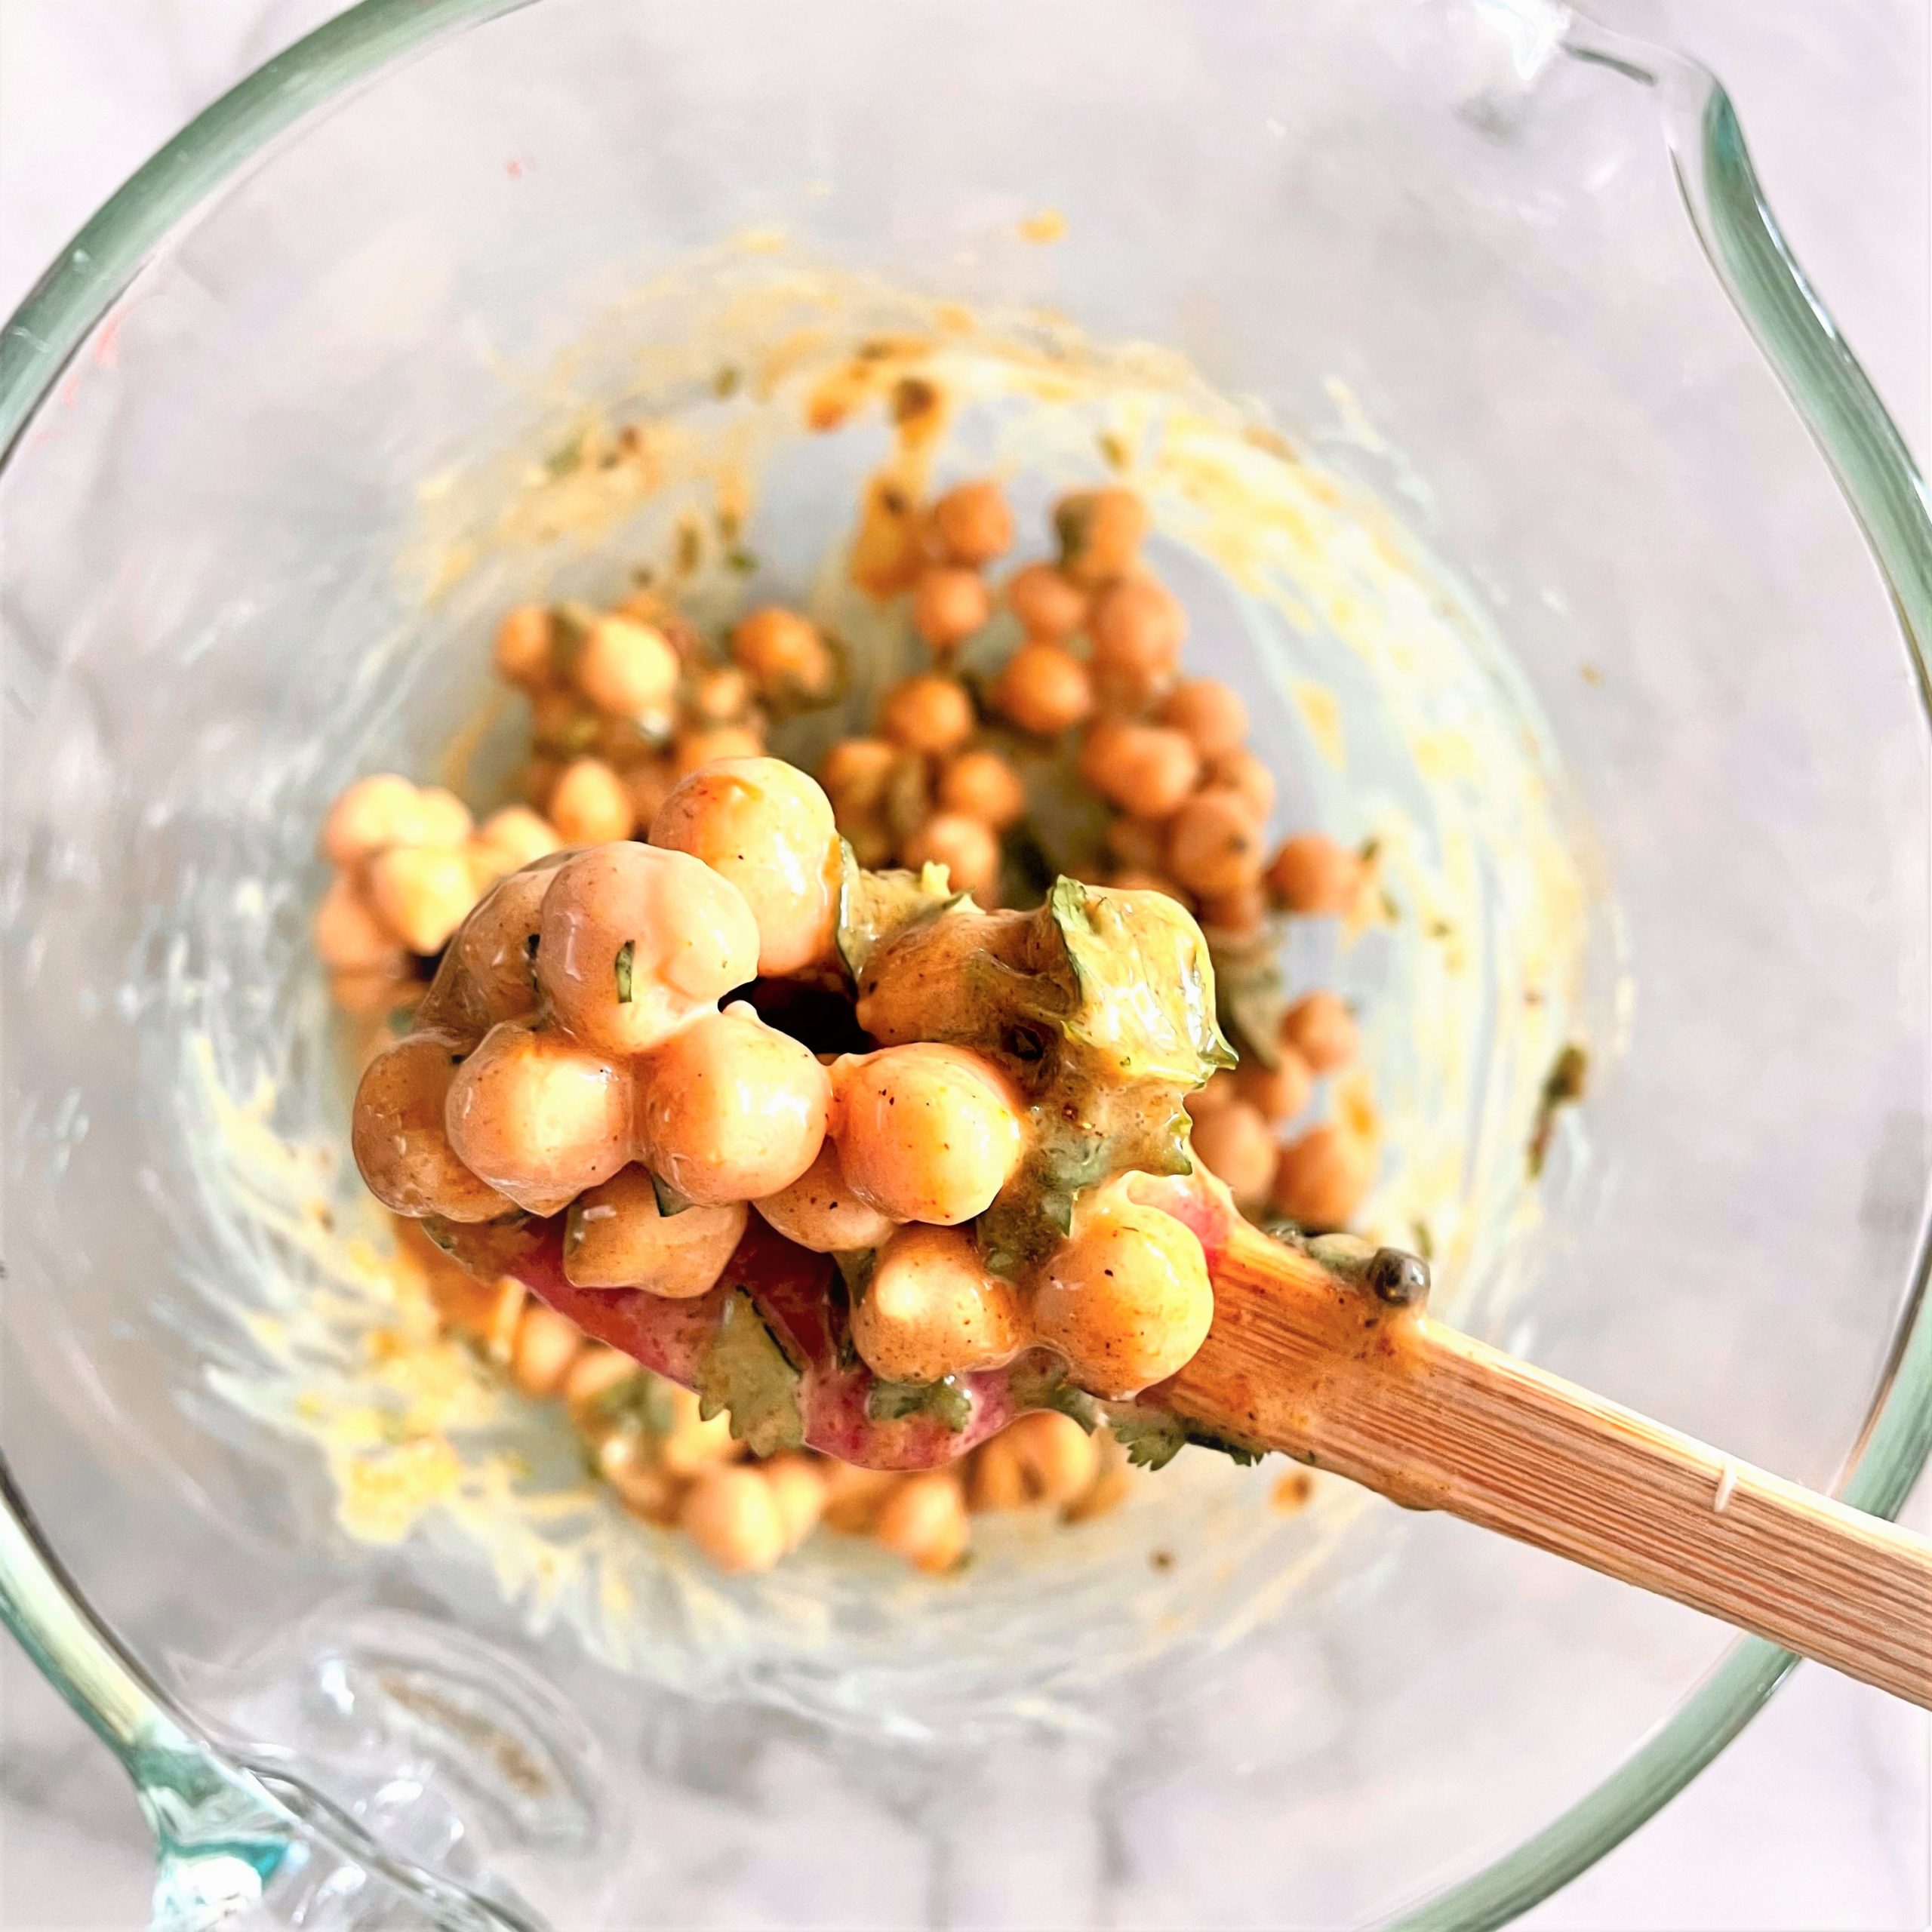 stirring curried chickpea salad with grilled veggies in a glass bowl